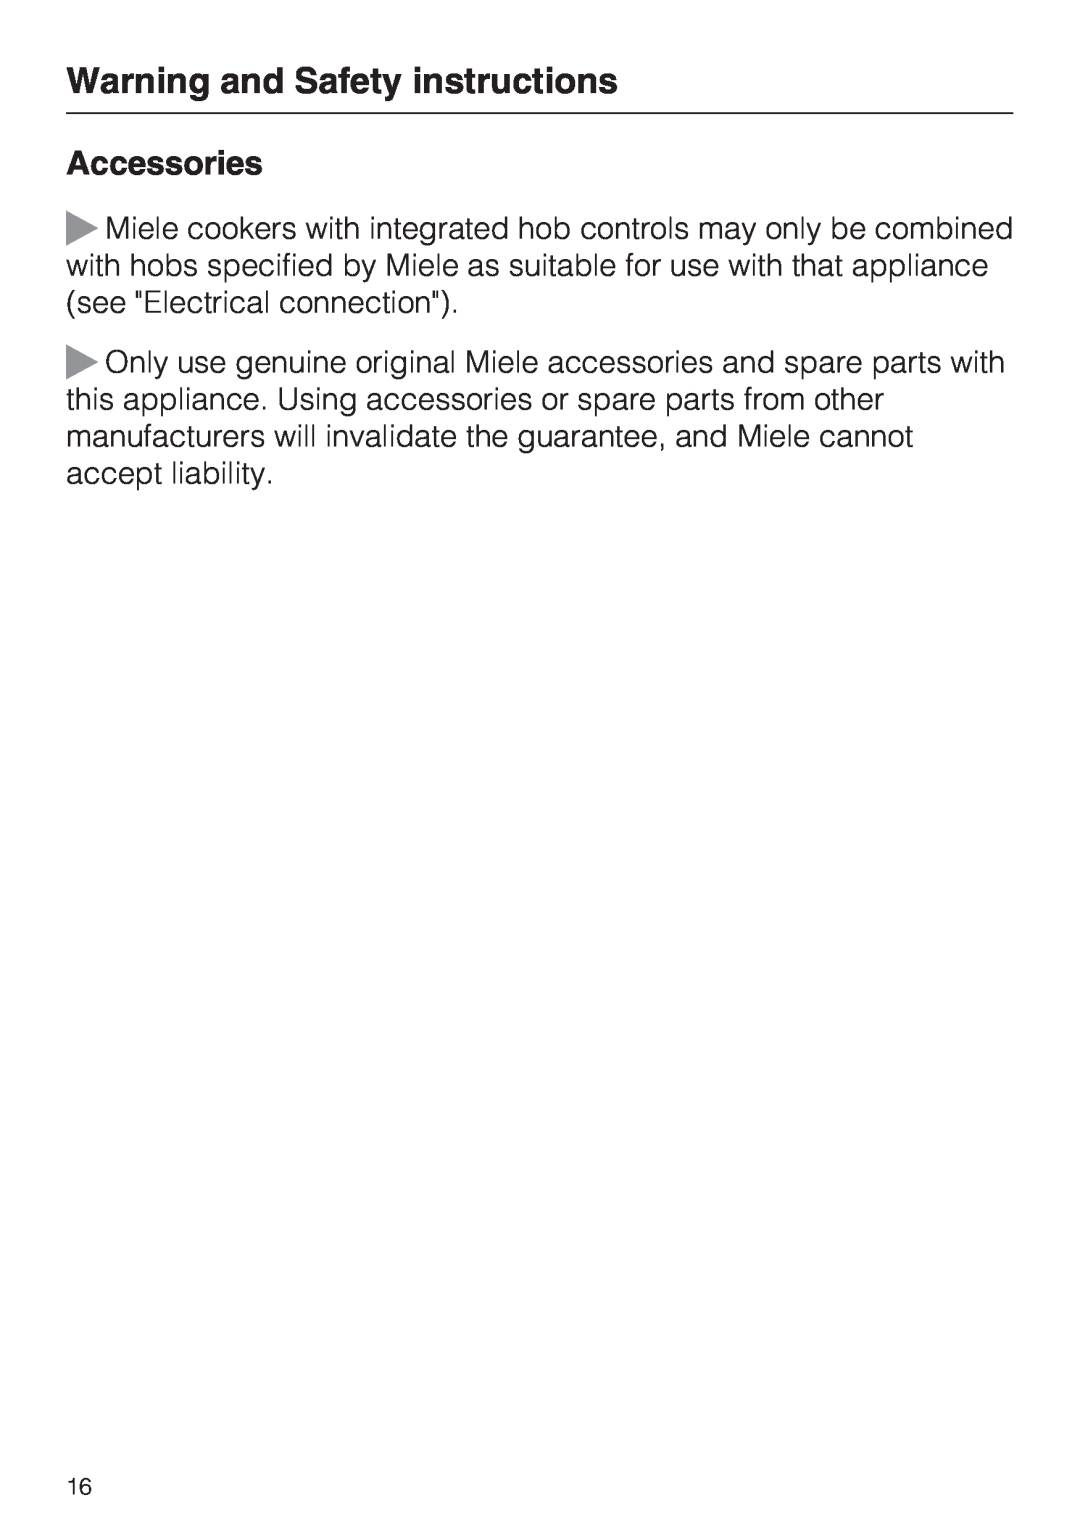 Miele 10 102 470 installation instructions Accessories, Warning and Safety instructions 